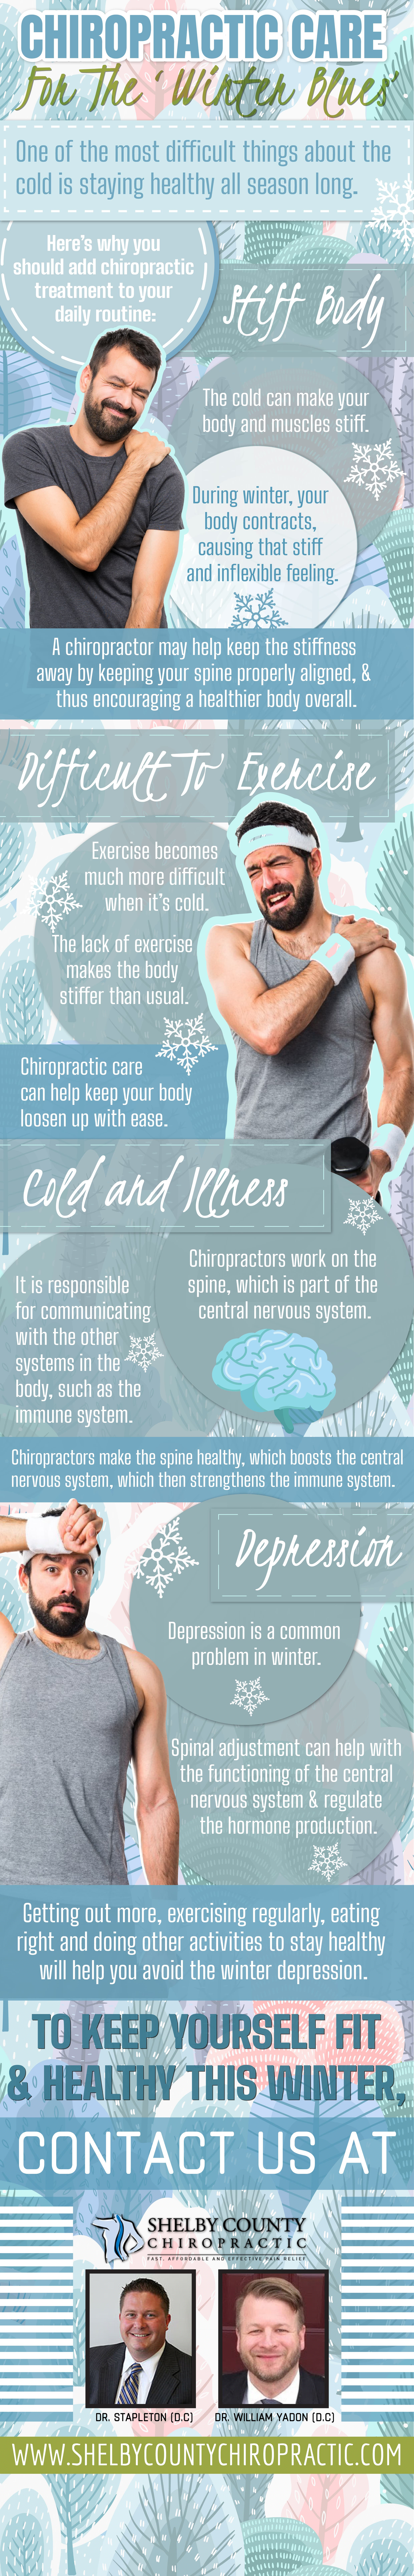 Chiropractic-Care-for-Winter-Issues